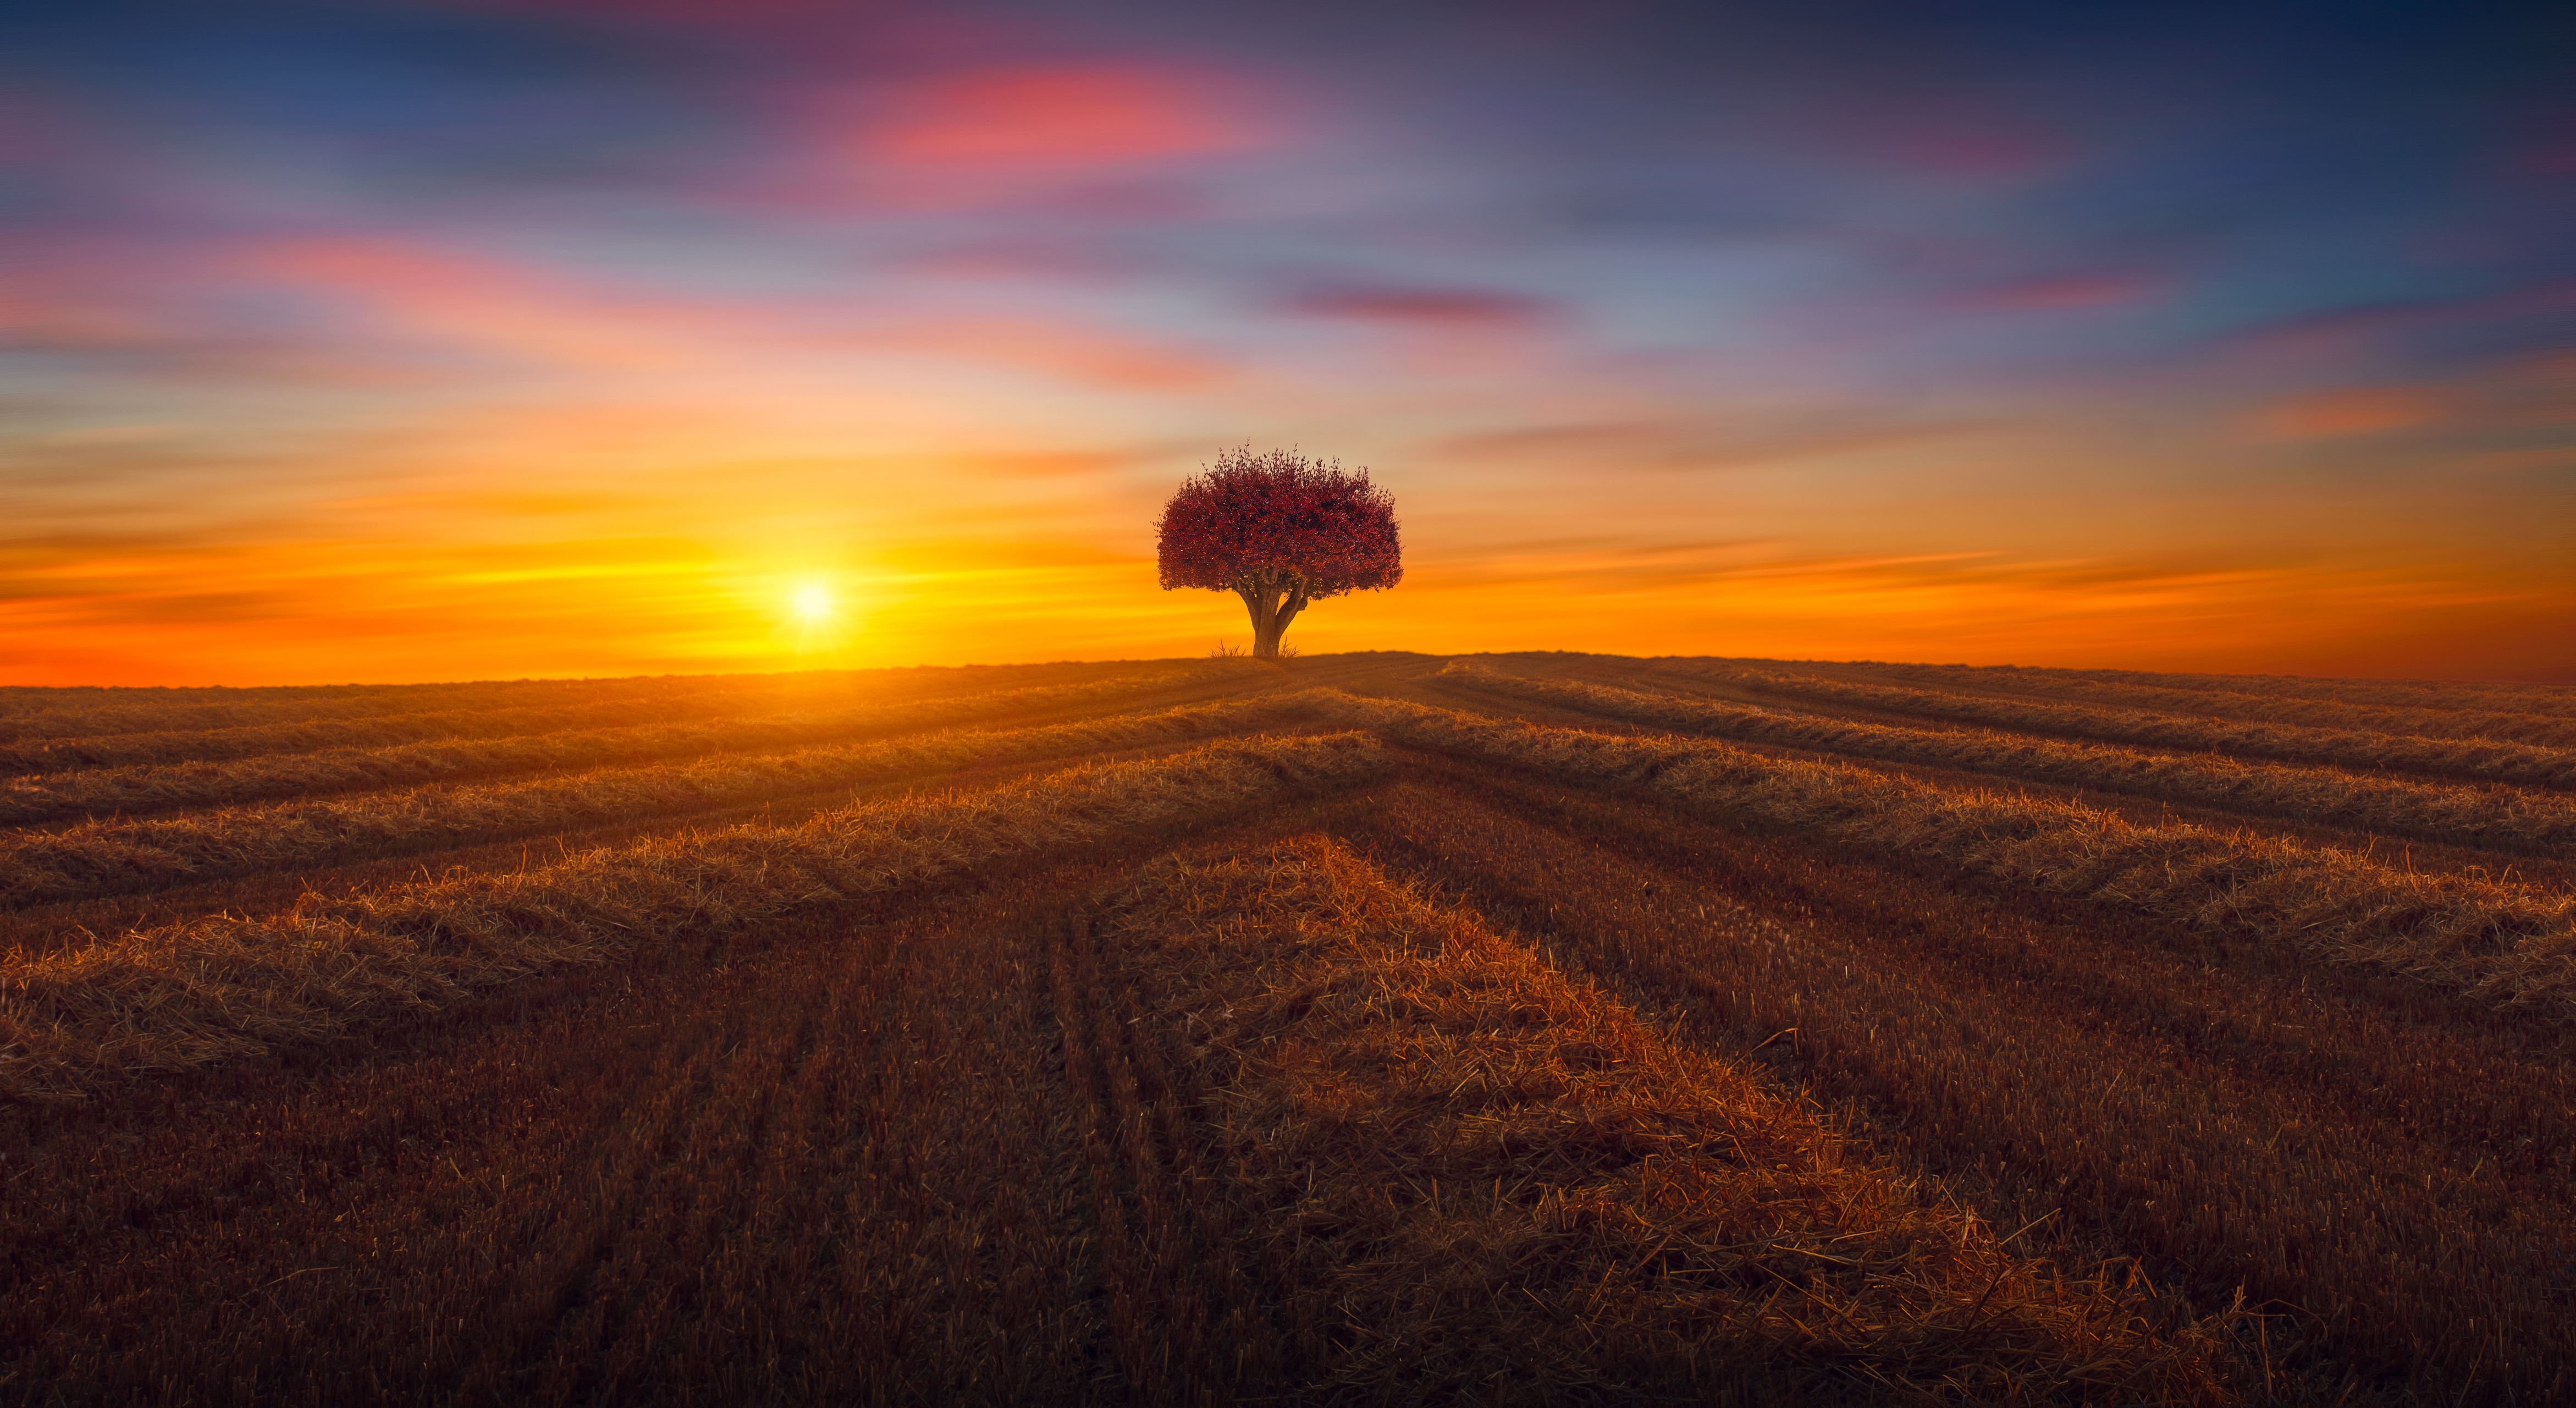 HD wallpaper, Fields, Agriculture, Evening, Countryside, Lone Tree, 5K, Scenery, Sunset, Landscape